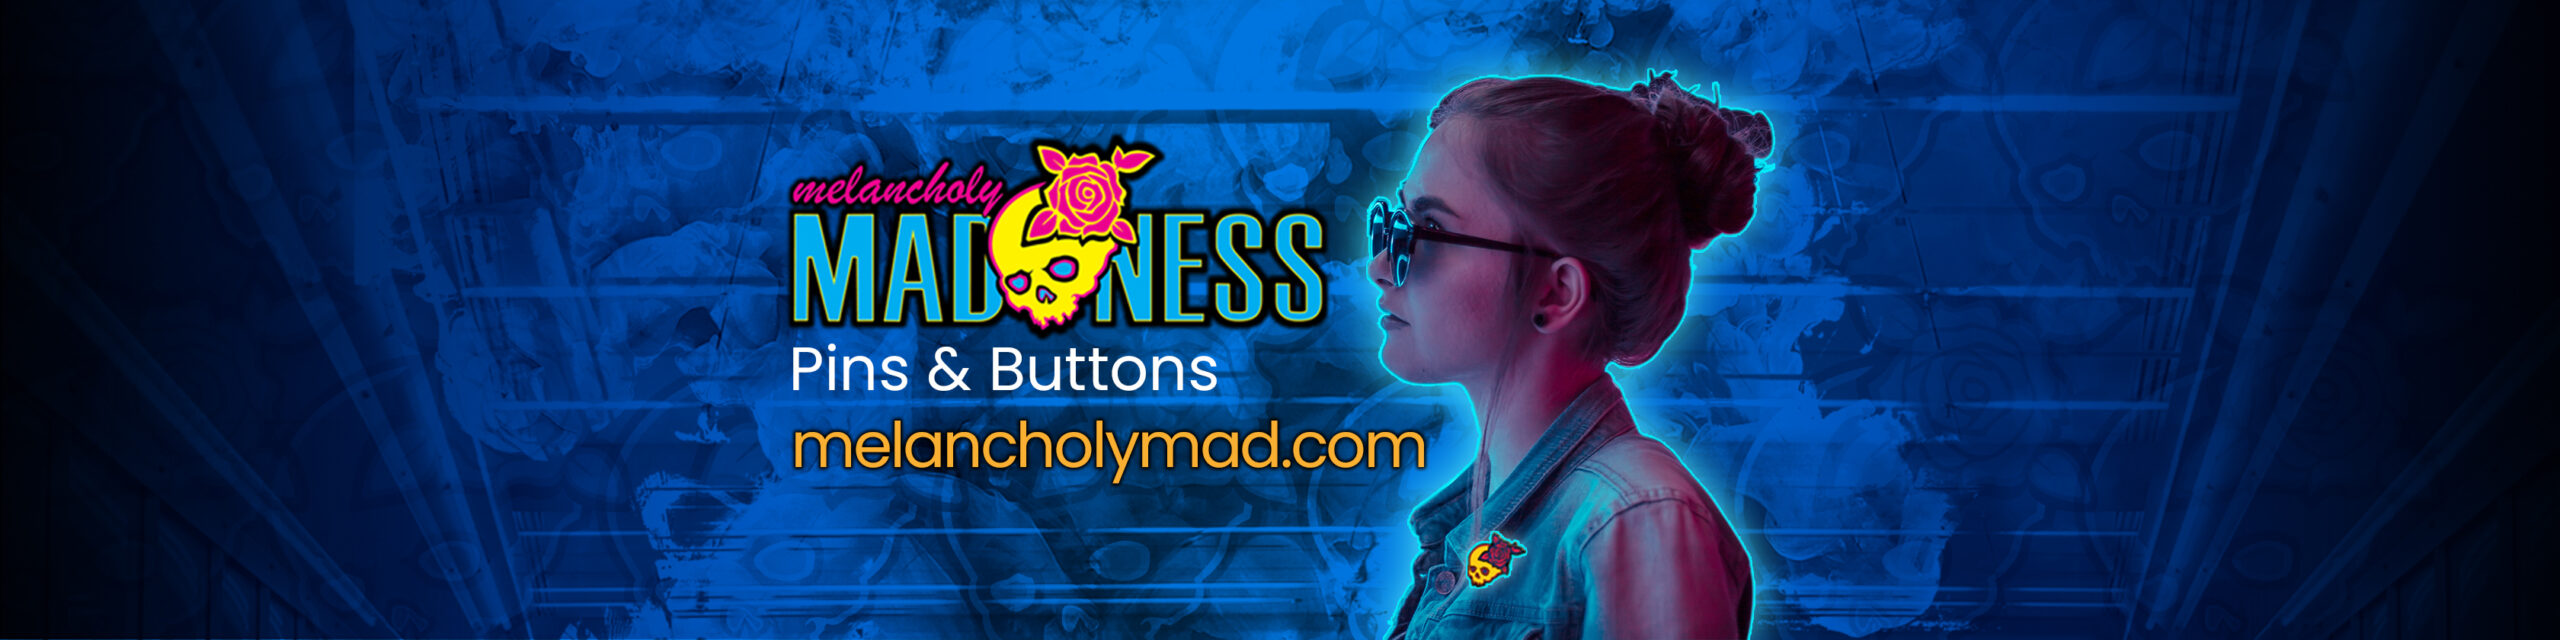 Melancholy Madness Pins & Buttons